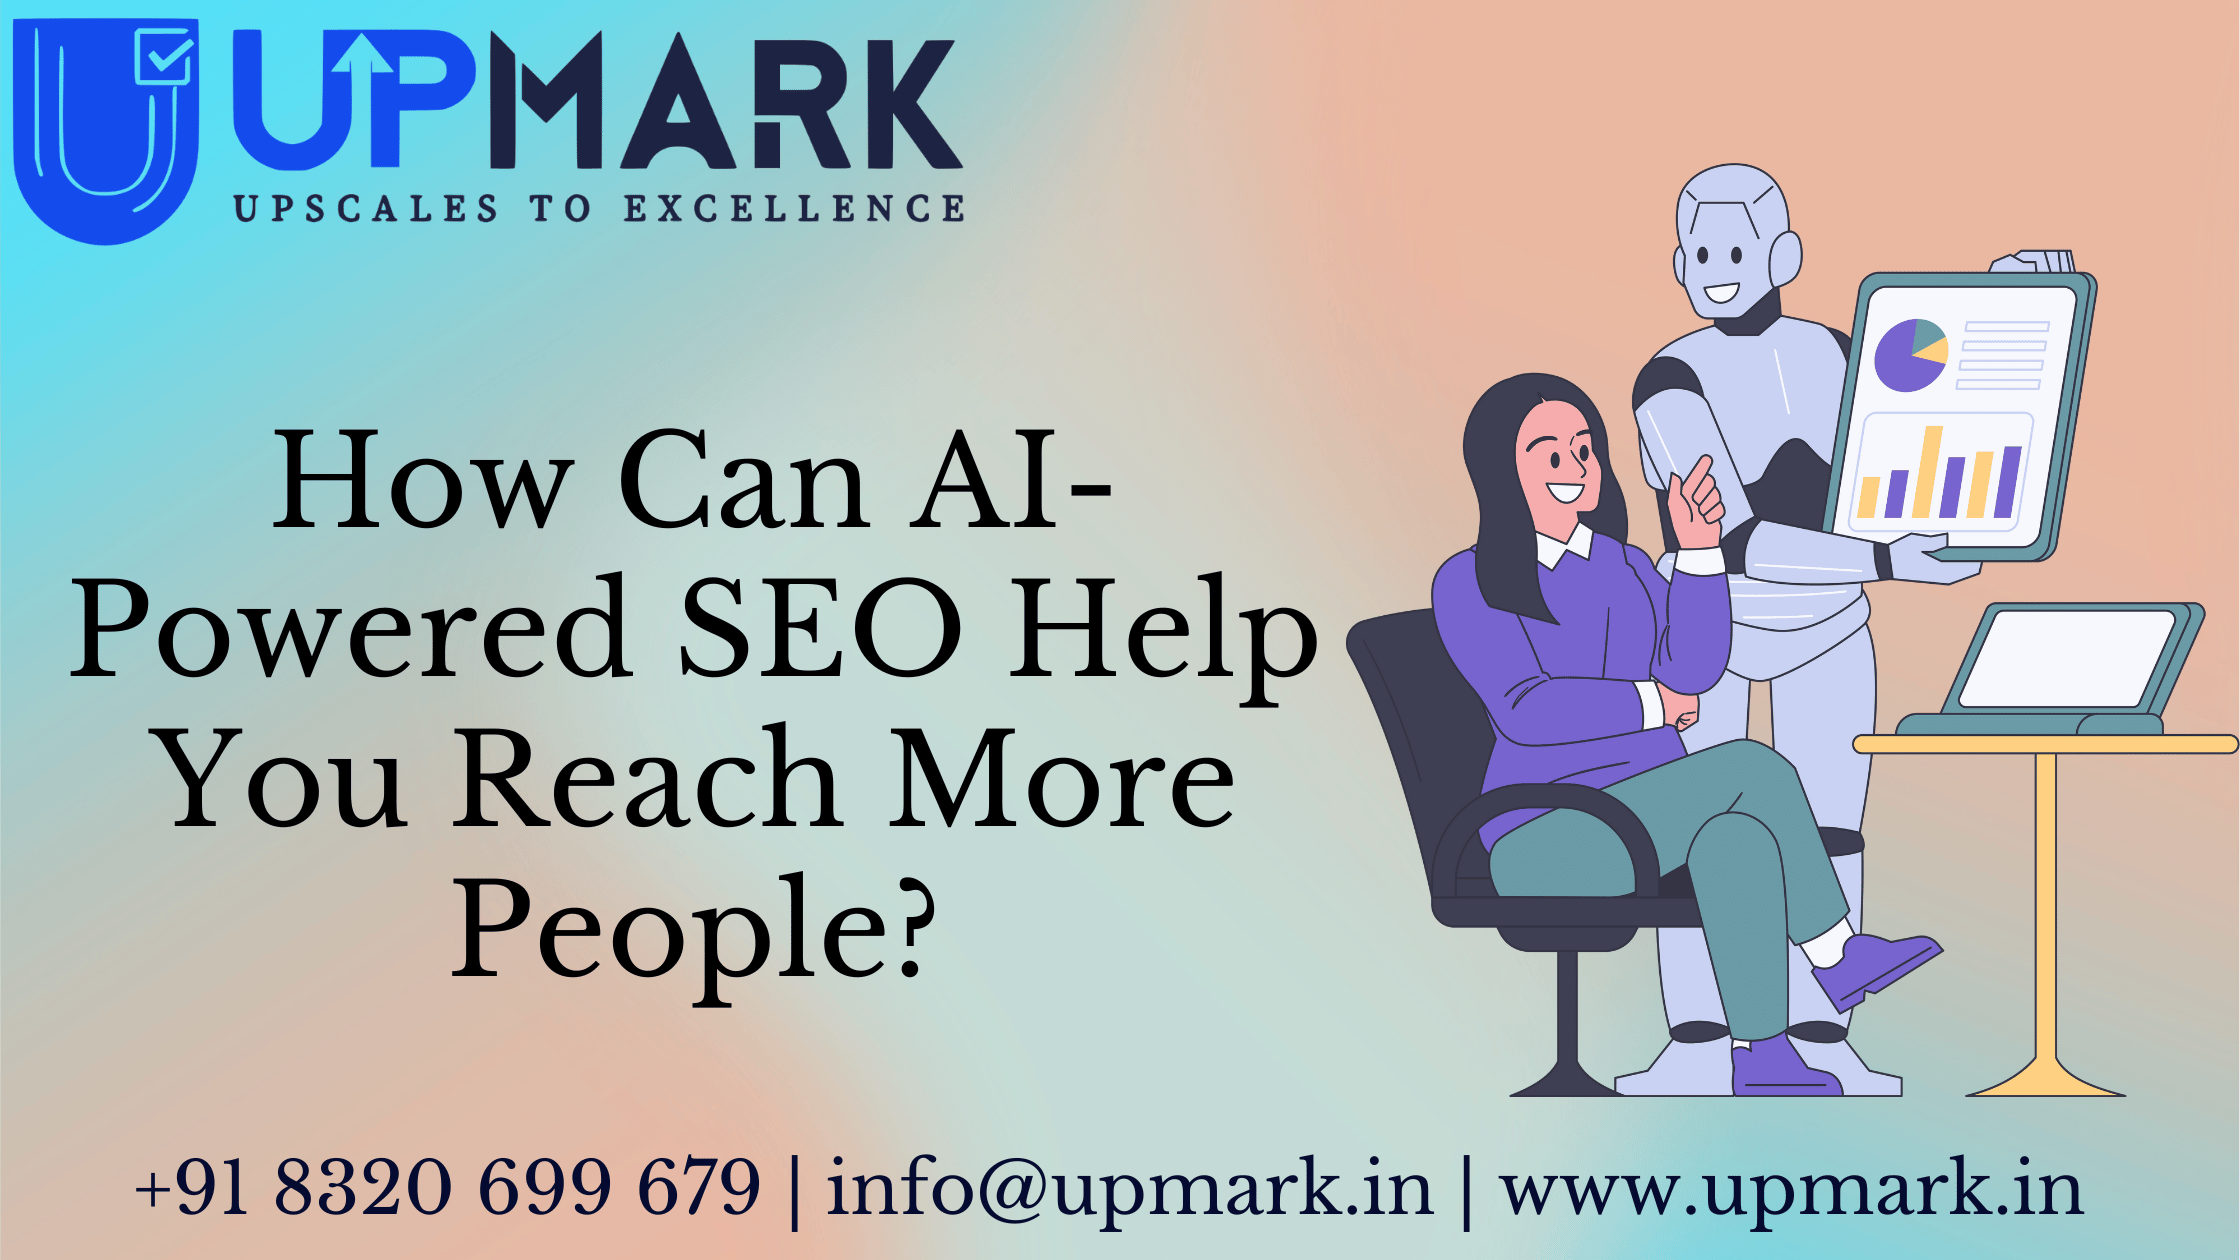 How Can AI-Powered SEO Help You Reach More People?